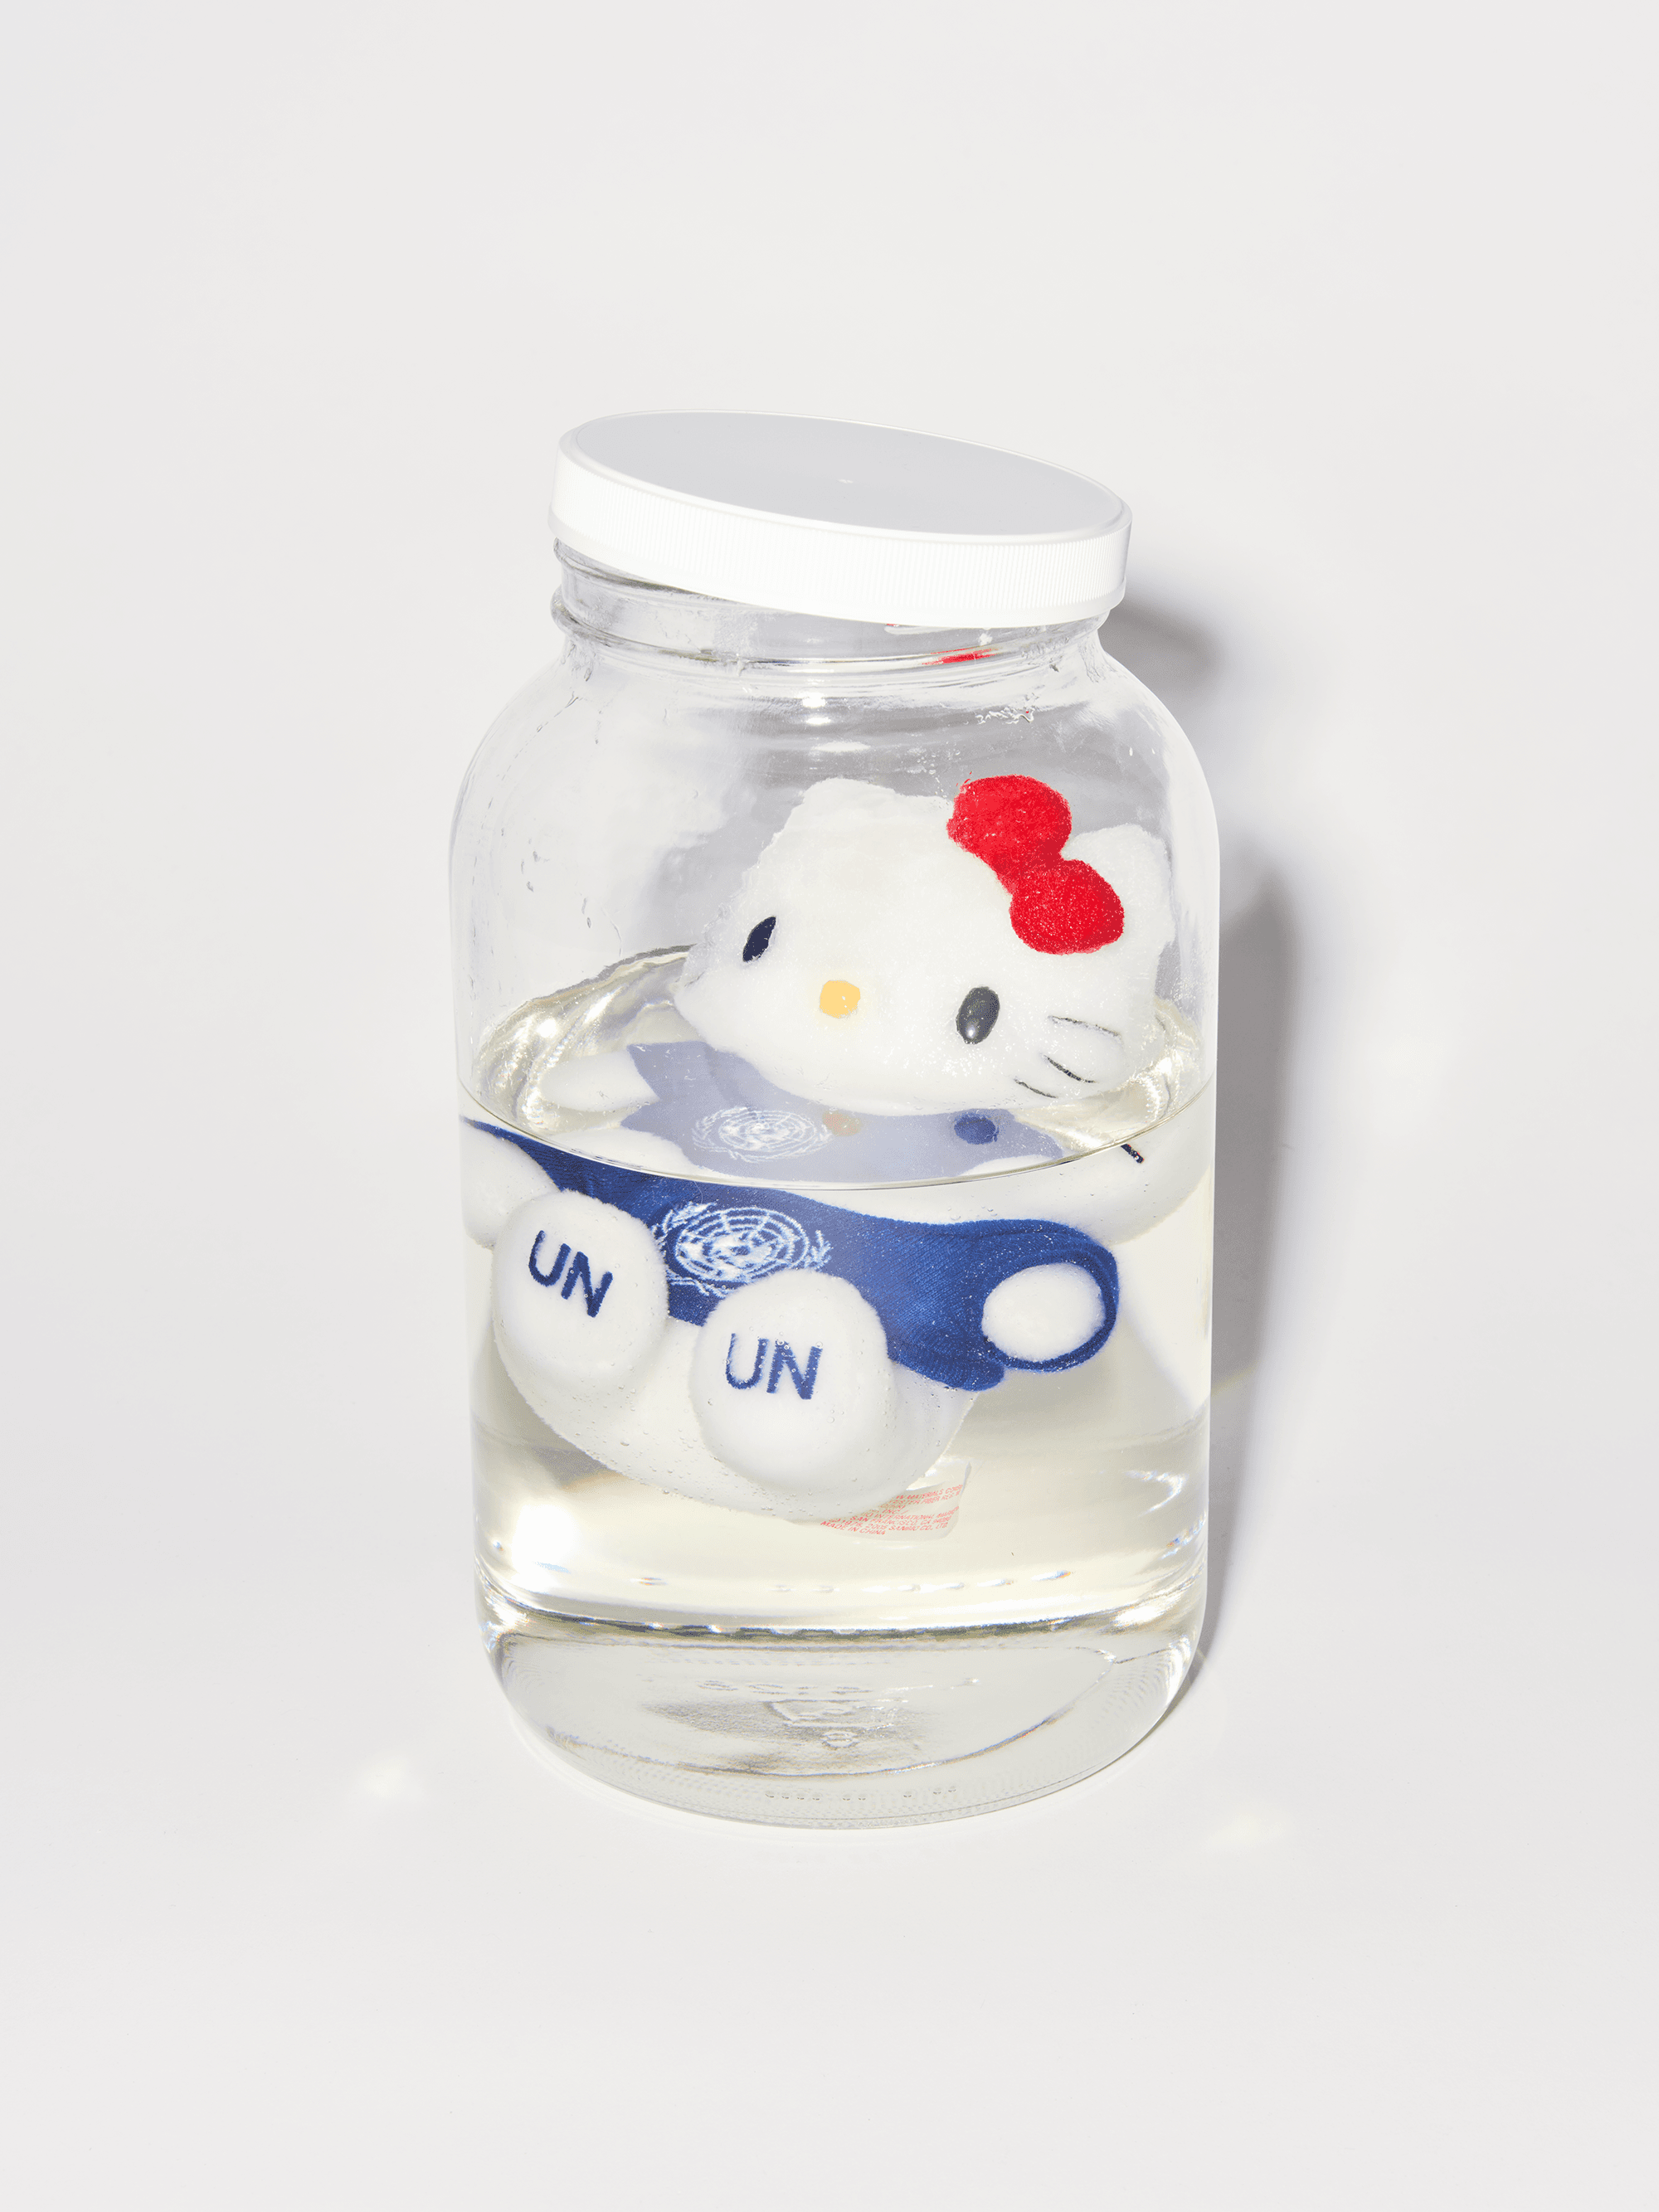 United Nations Hello Kitty Schitzo Tribute Jar Project Devirtualized (I love the antichrist) 2005 Sanrio Hello Kitty United Nations Stuffed Toy, .5 Gallons High Fructose Corn Syrup, 1 Gallon Glass Jar, Polypropylene screw on cap with PTFE foam liner
2014-2022, Transmedium